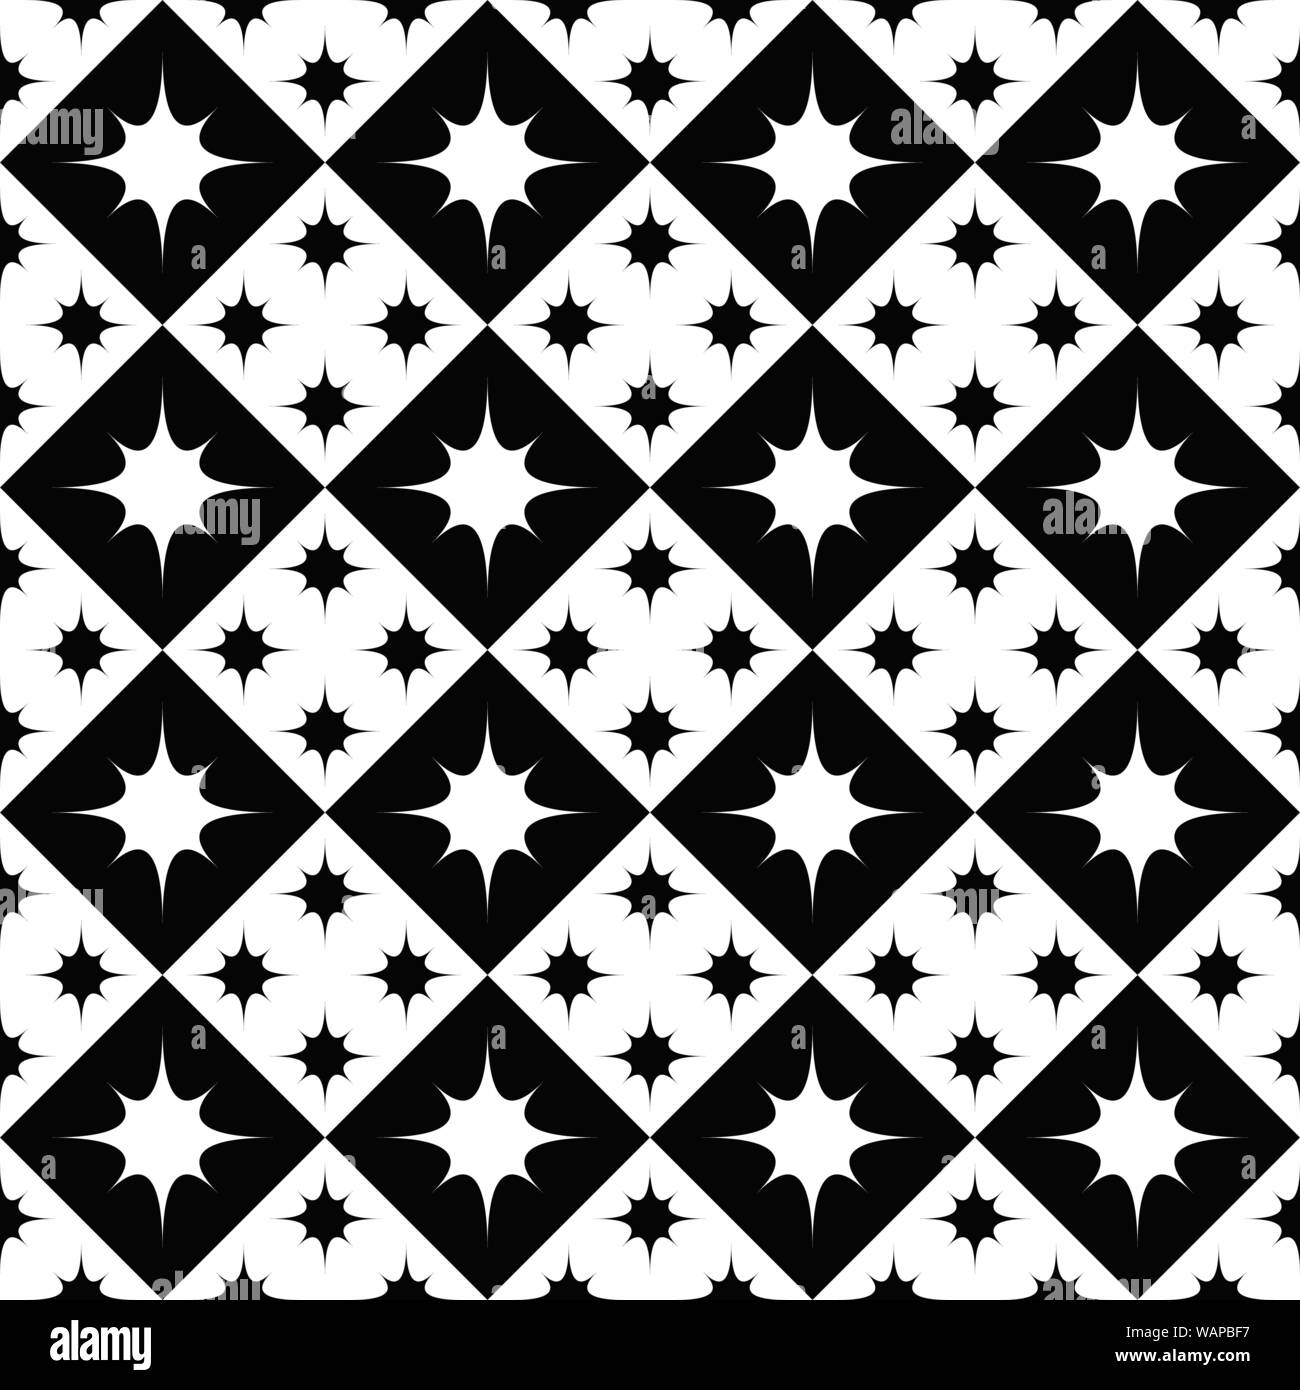 Black And White Geometrical Star Pattern Background Design Monochrome Vector Illustration From 8095